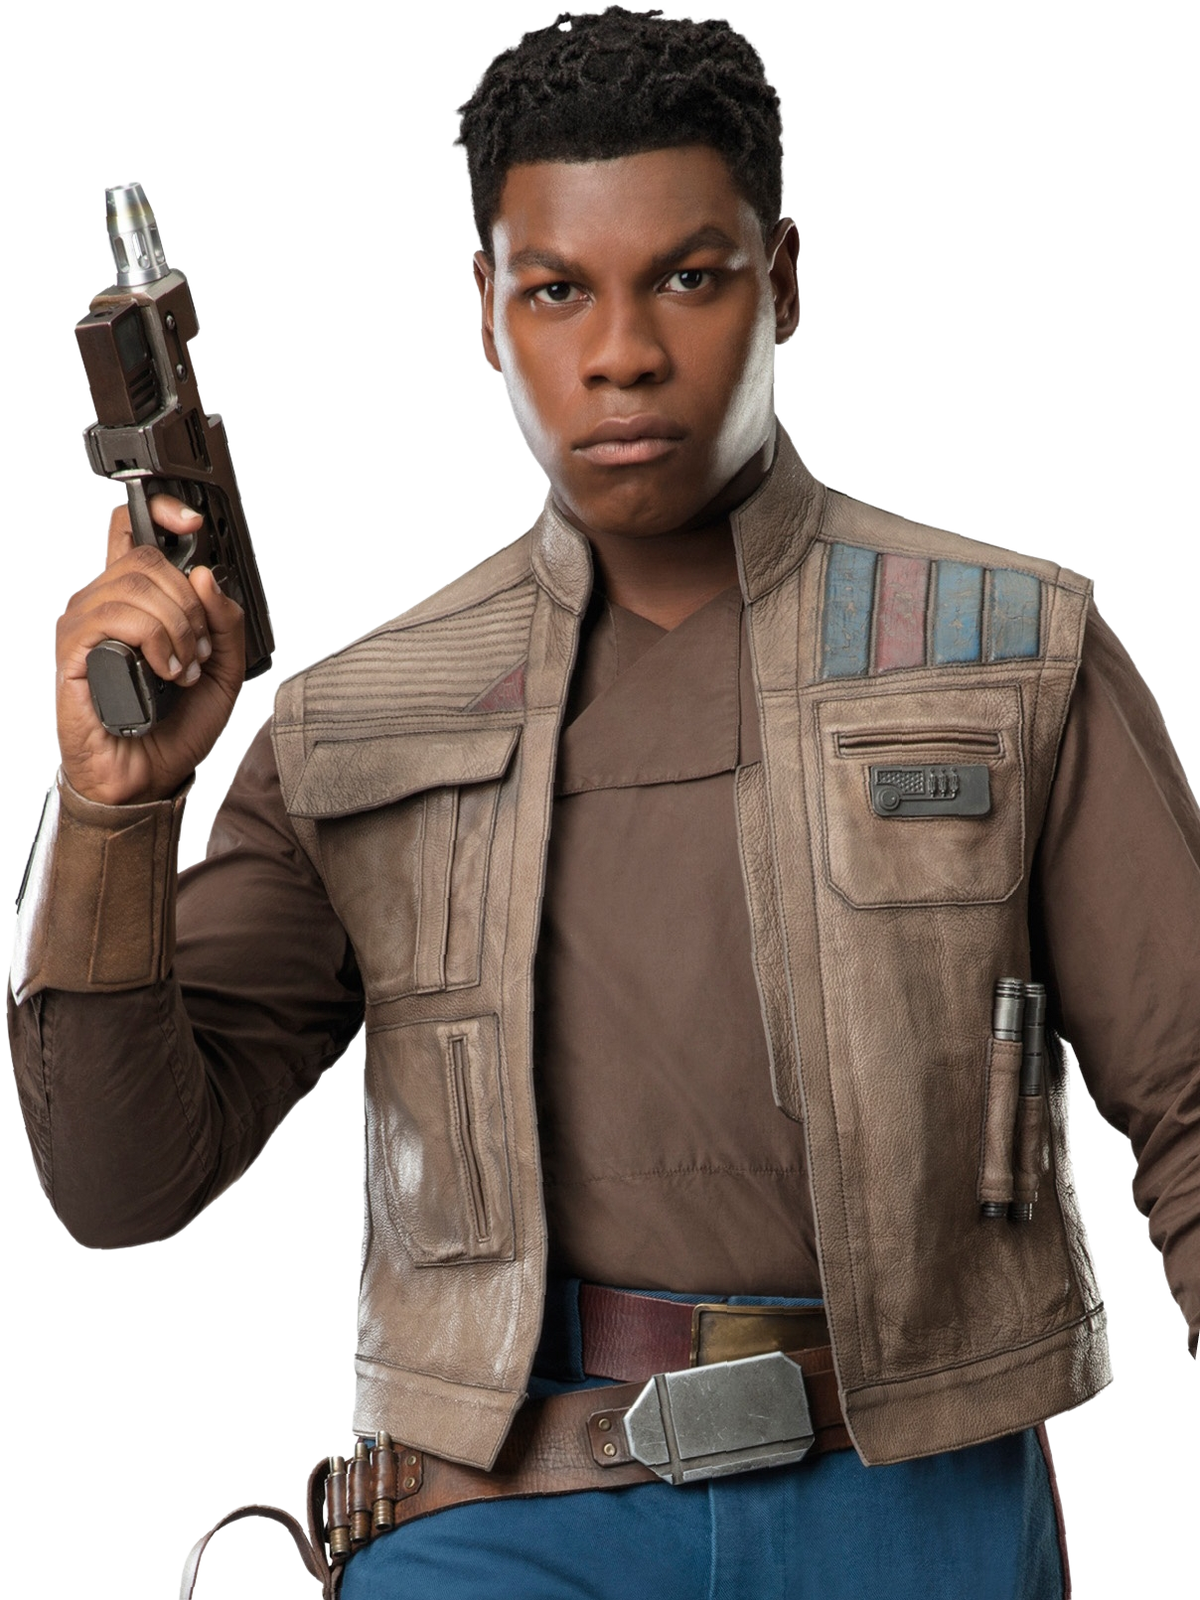 Who is Finn in the Star Wars series?